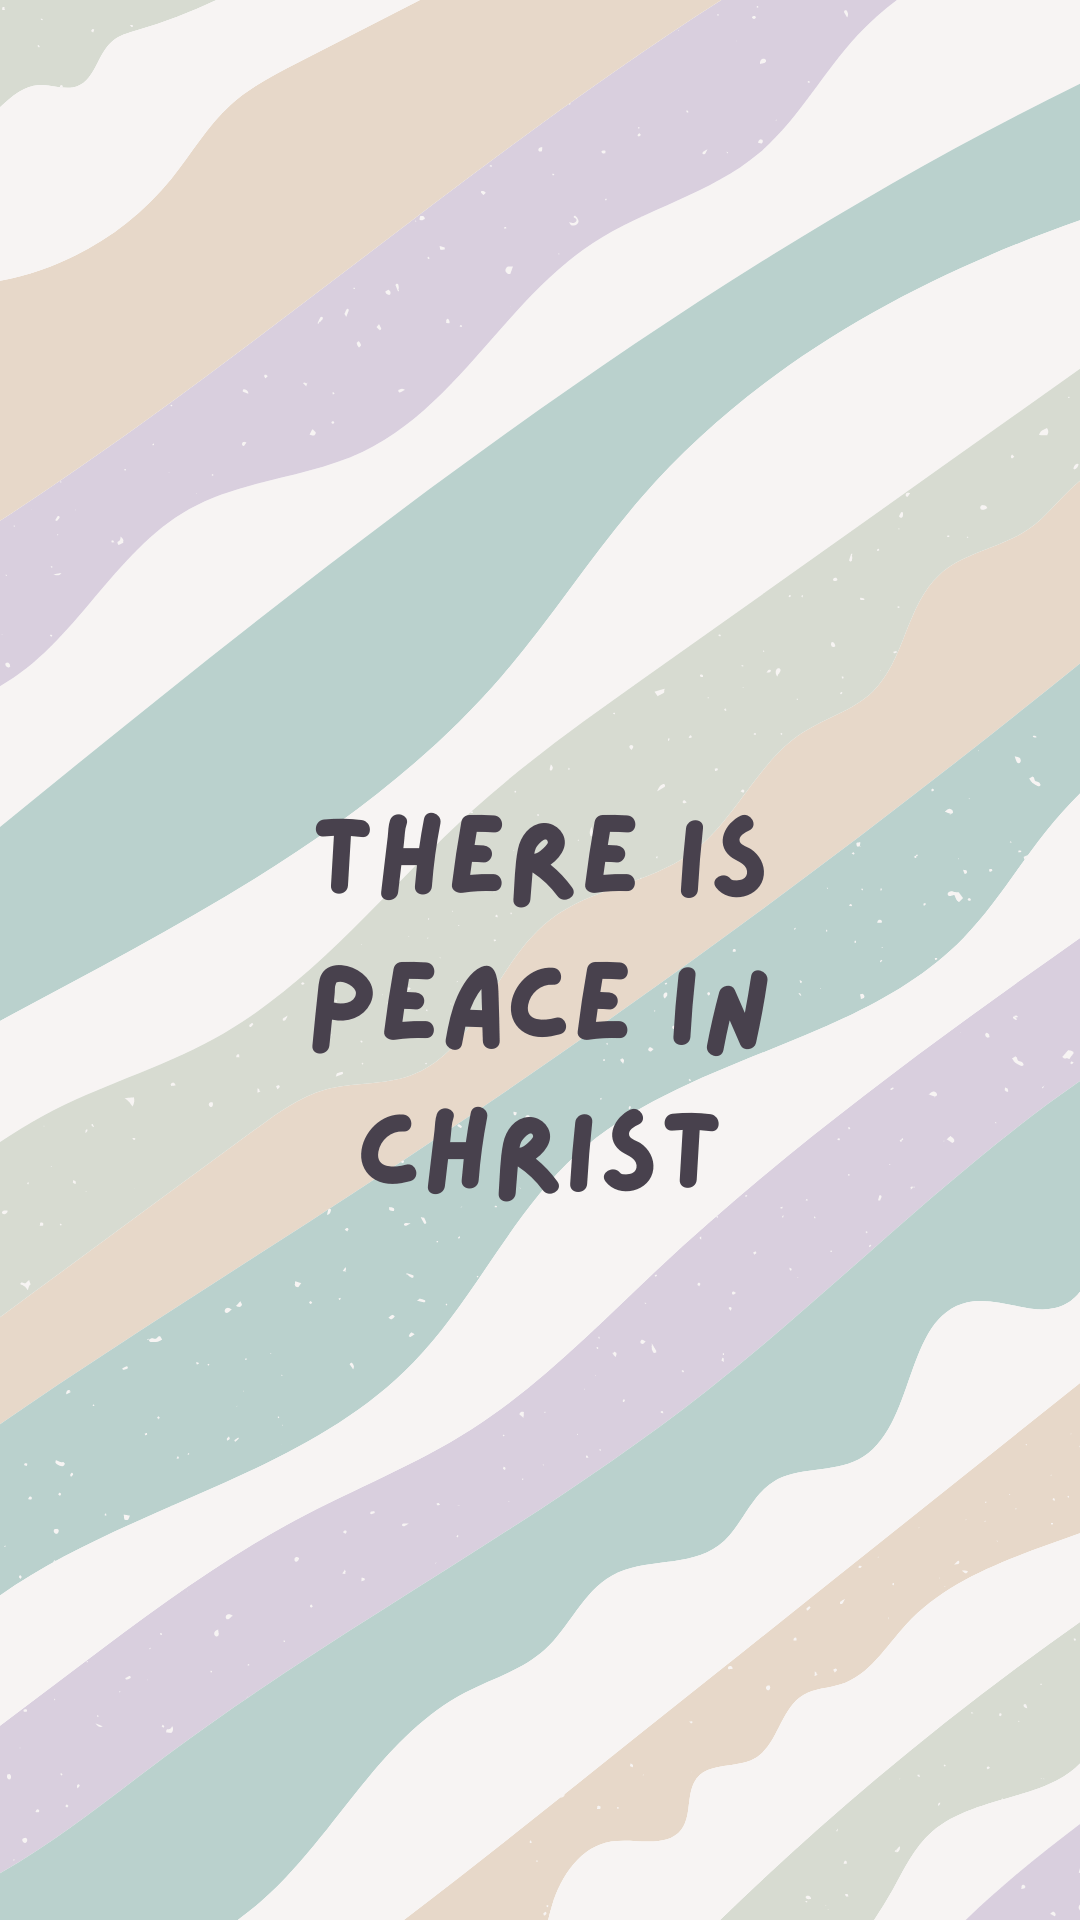 There is peace in christ - Turquoise, Jesus, peace, Christian